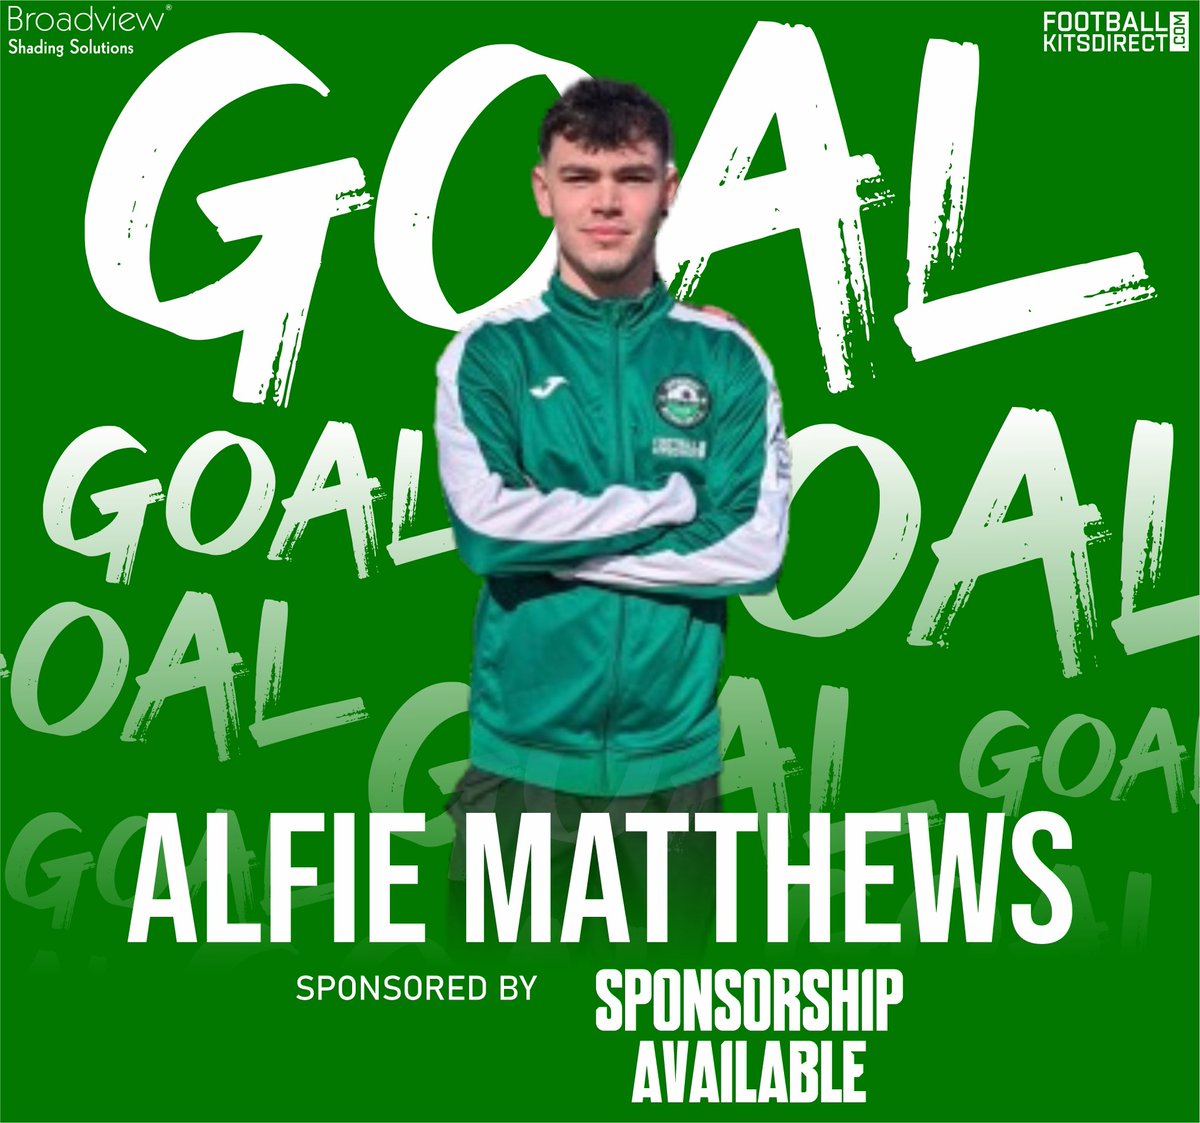 GOOOALLLL ⚽️ We have our third of the evening as Alfie Matthews gets on the scoresheet! 🔴 0-3 🟢